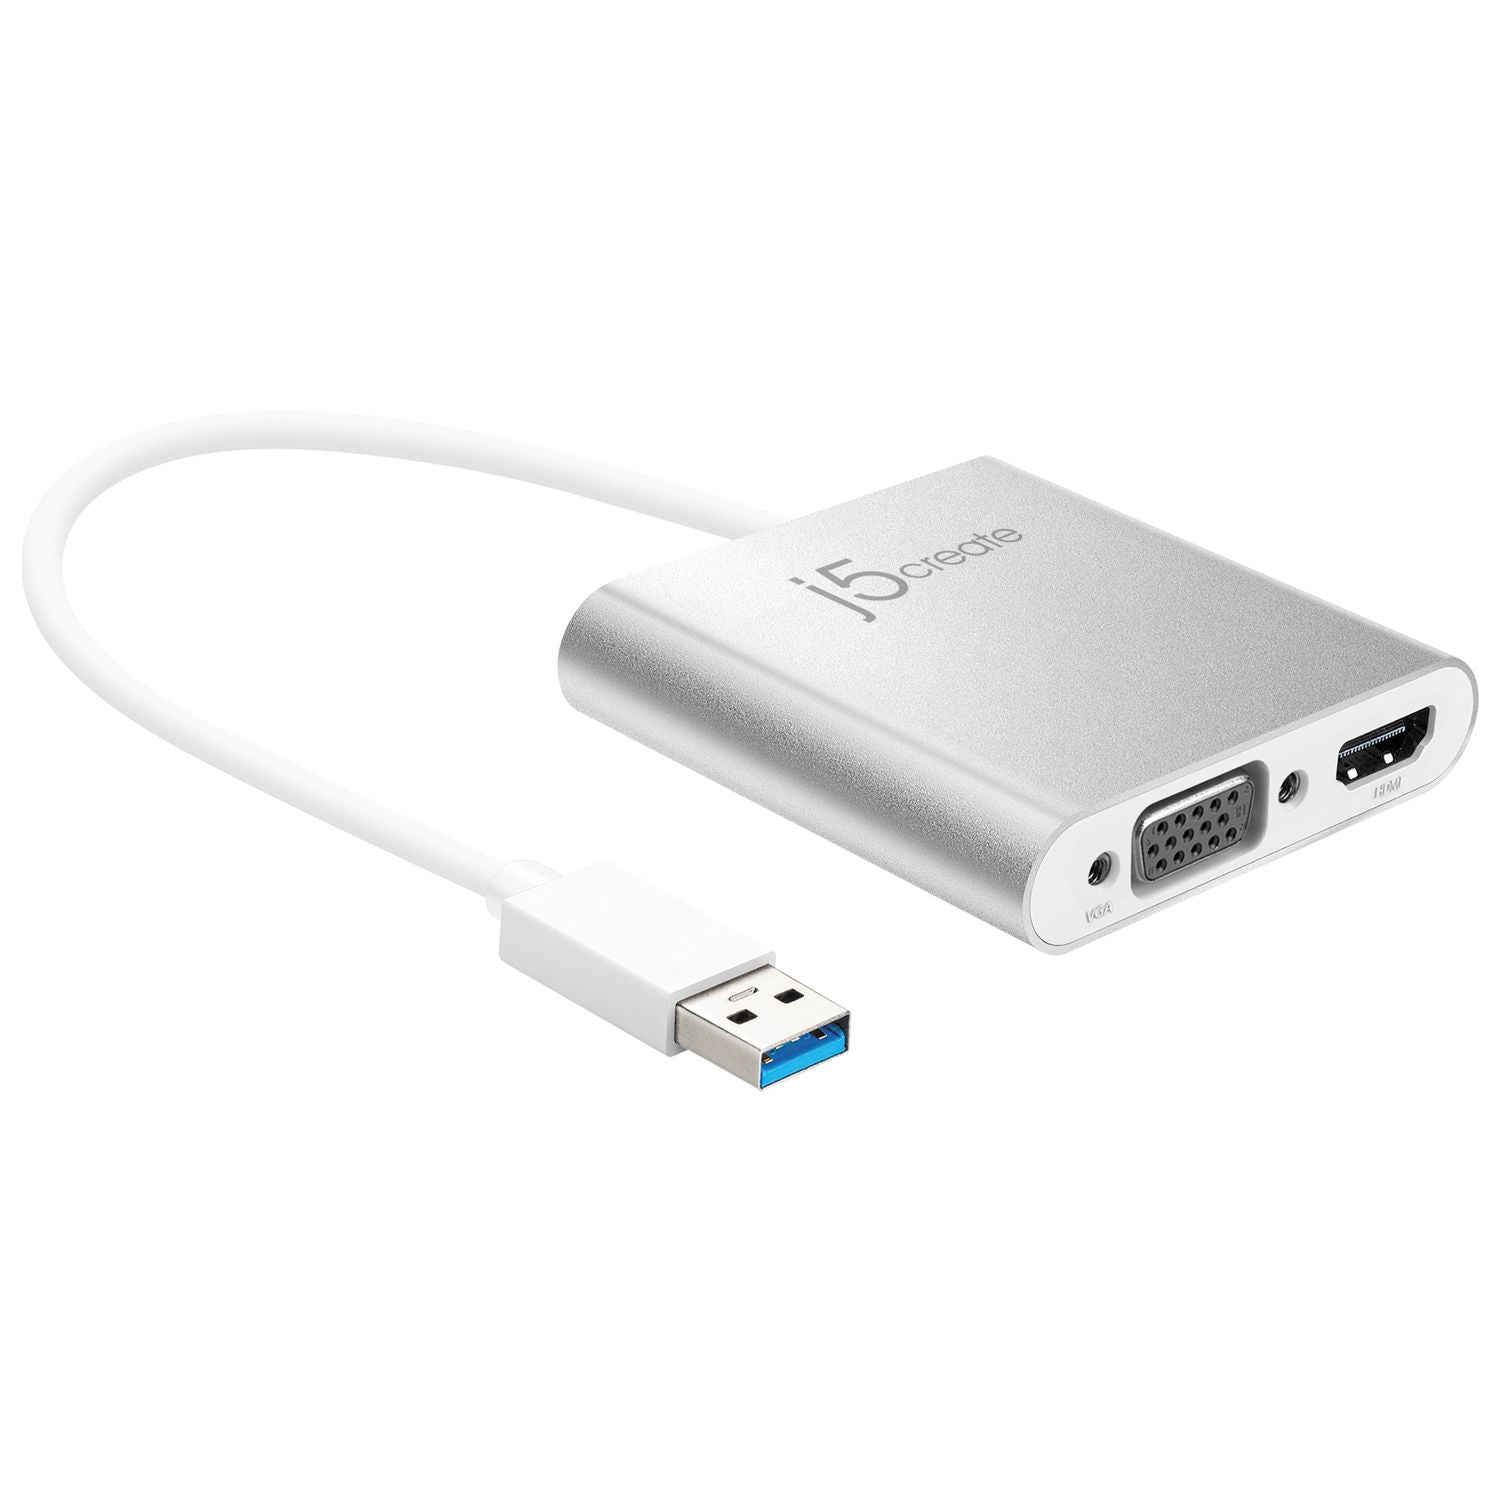 threshold Situation they USB™ 3.0 to HDMI™ & VGA Multi-Monitor Adapter – j5create